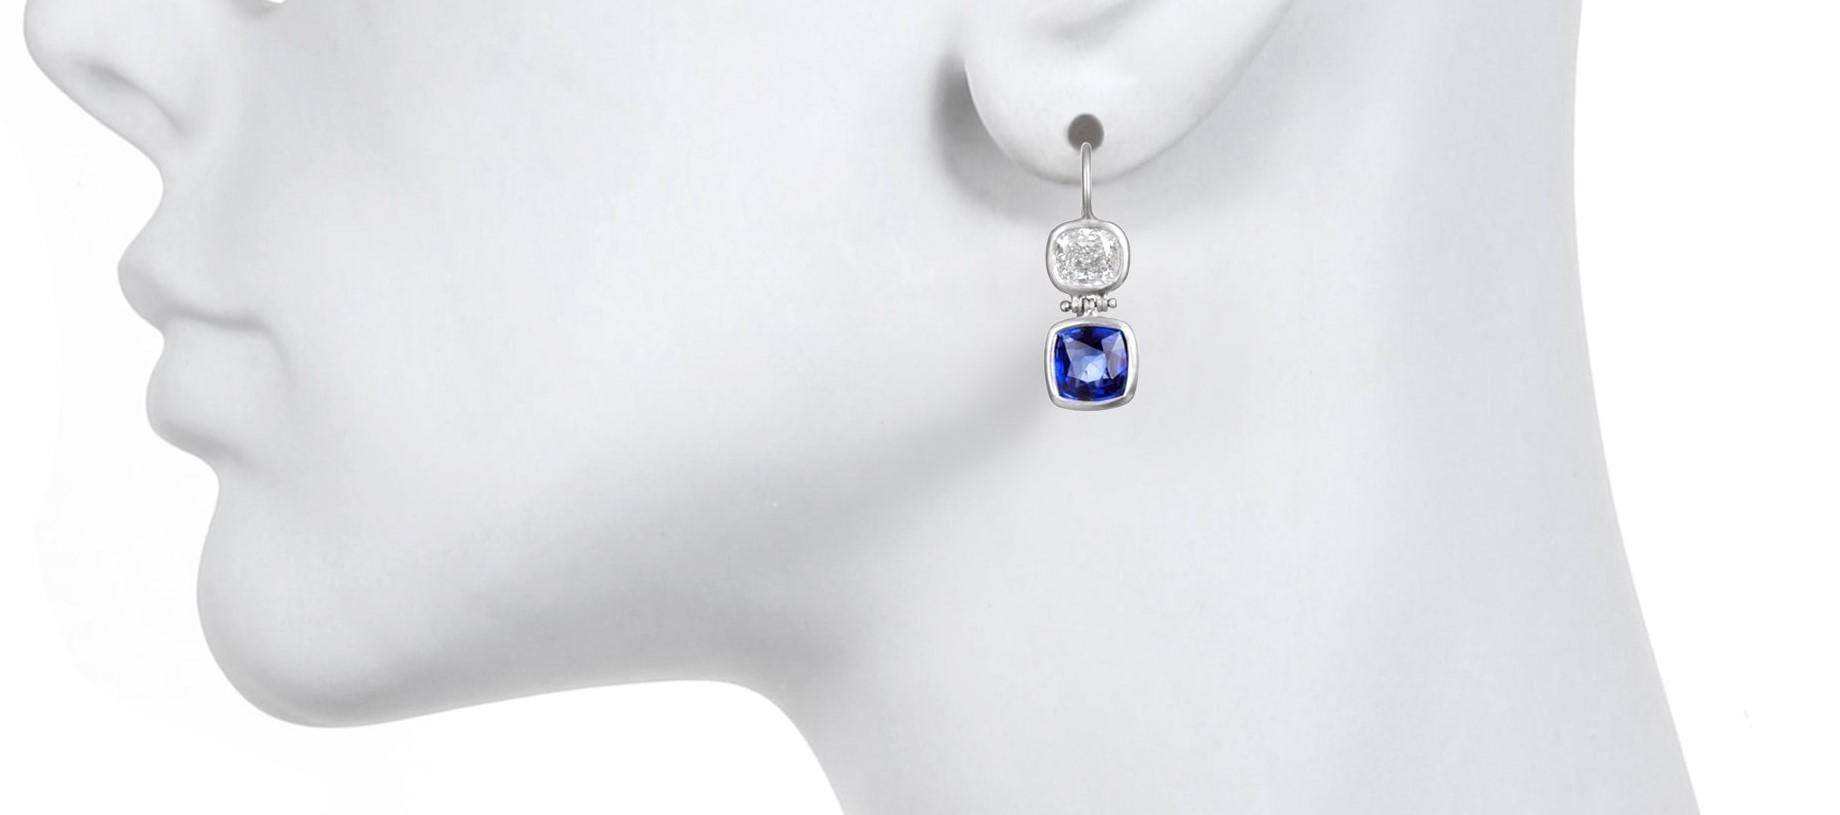 Enter into luxury with these Matte Platinum Diamond and Sapphire double hinged earrings.  Hosting spectacular quality, color and interesting shapes of diamonds and sapphires, these sparkly and unique earrings will elevate you to the heavens and